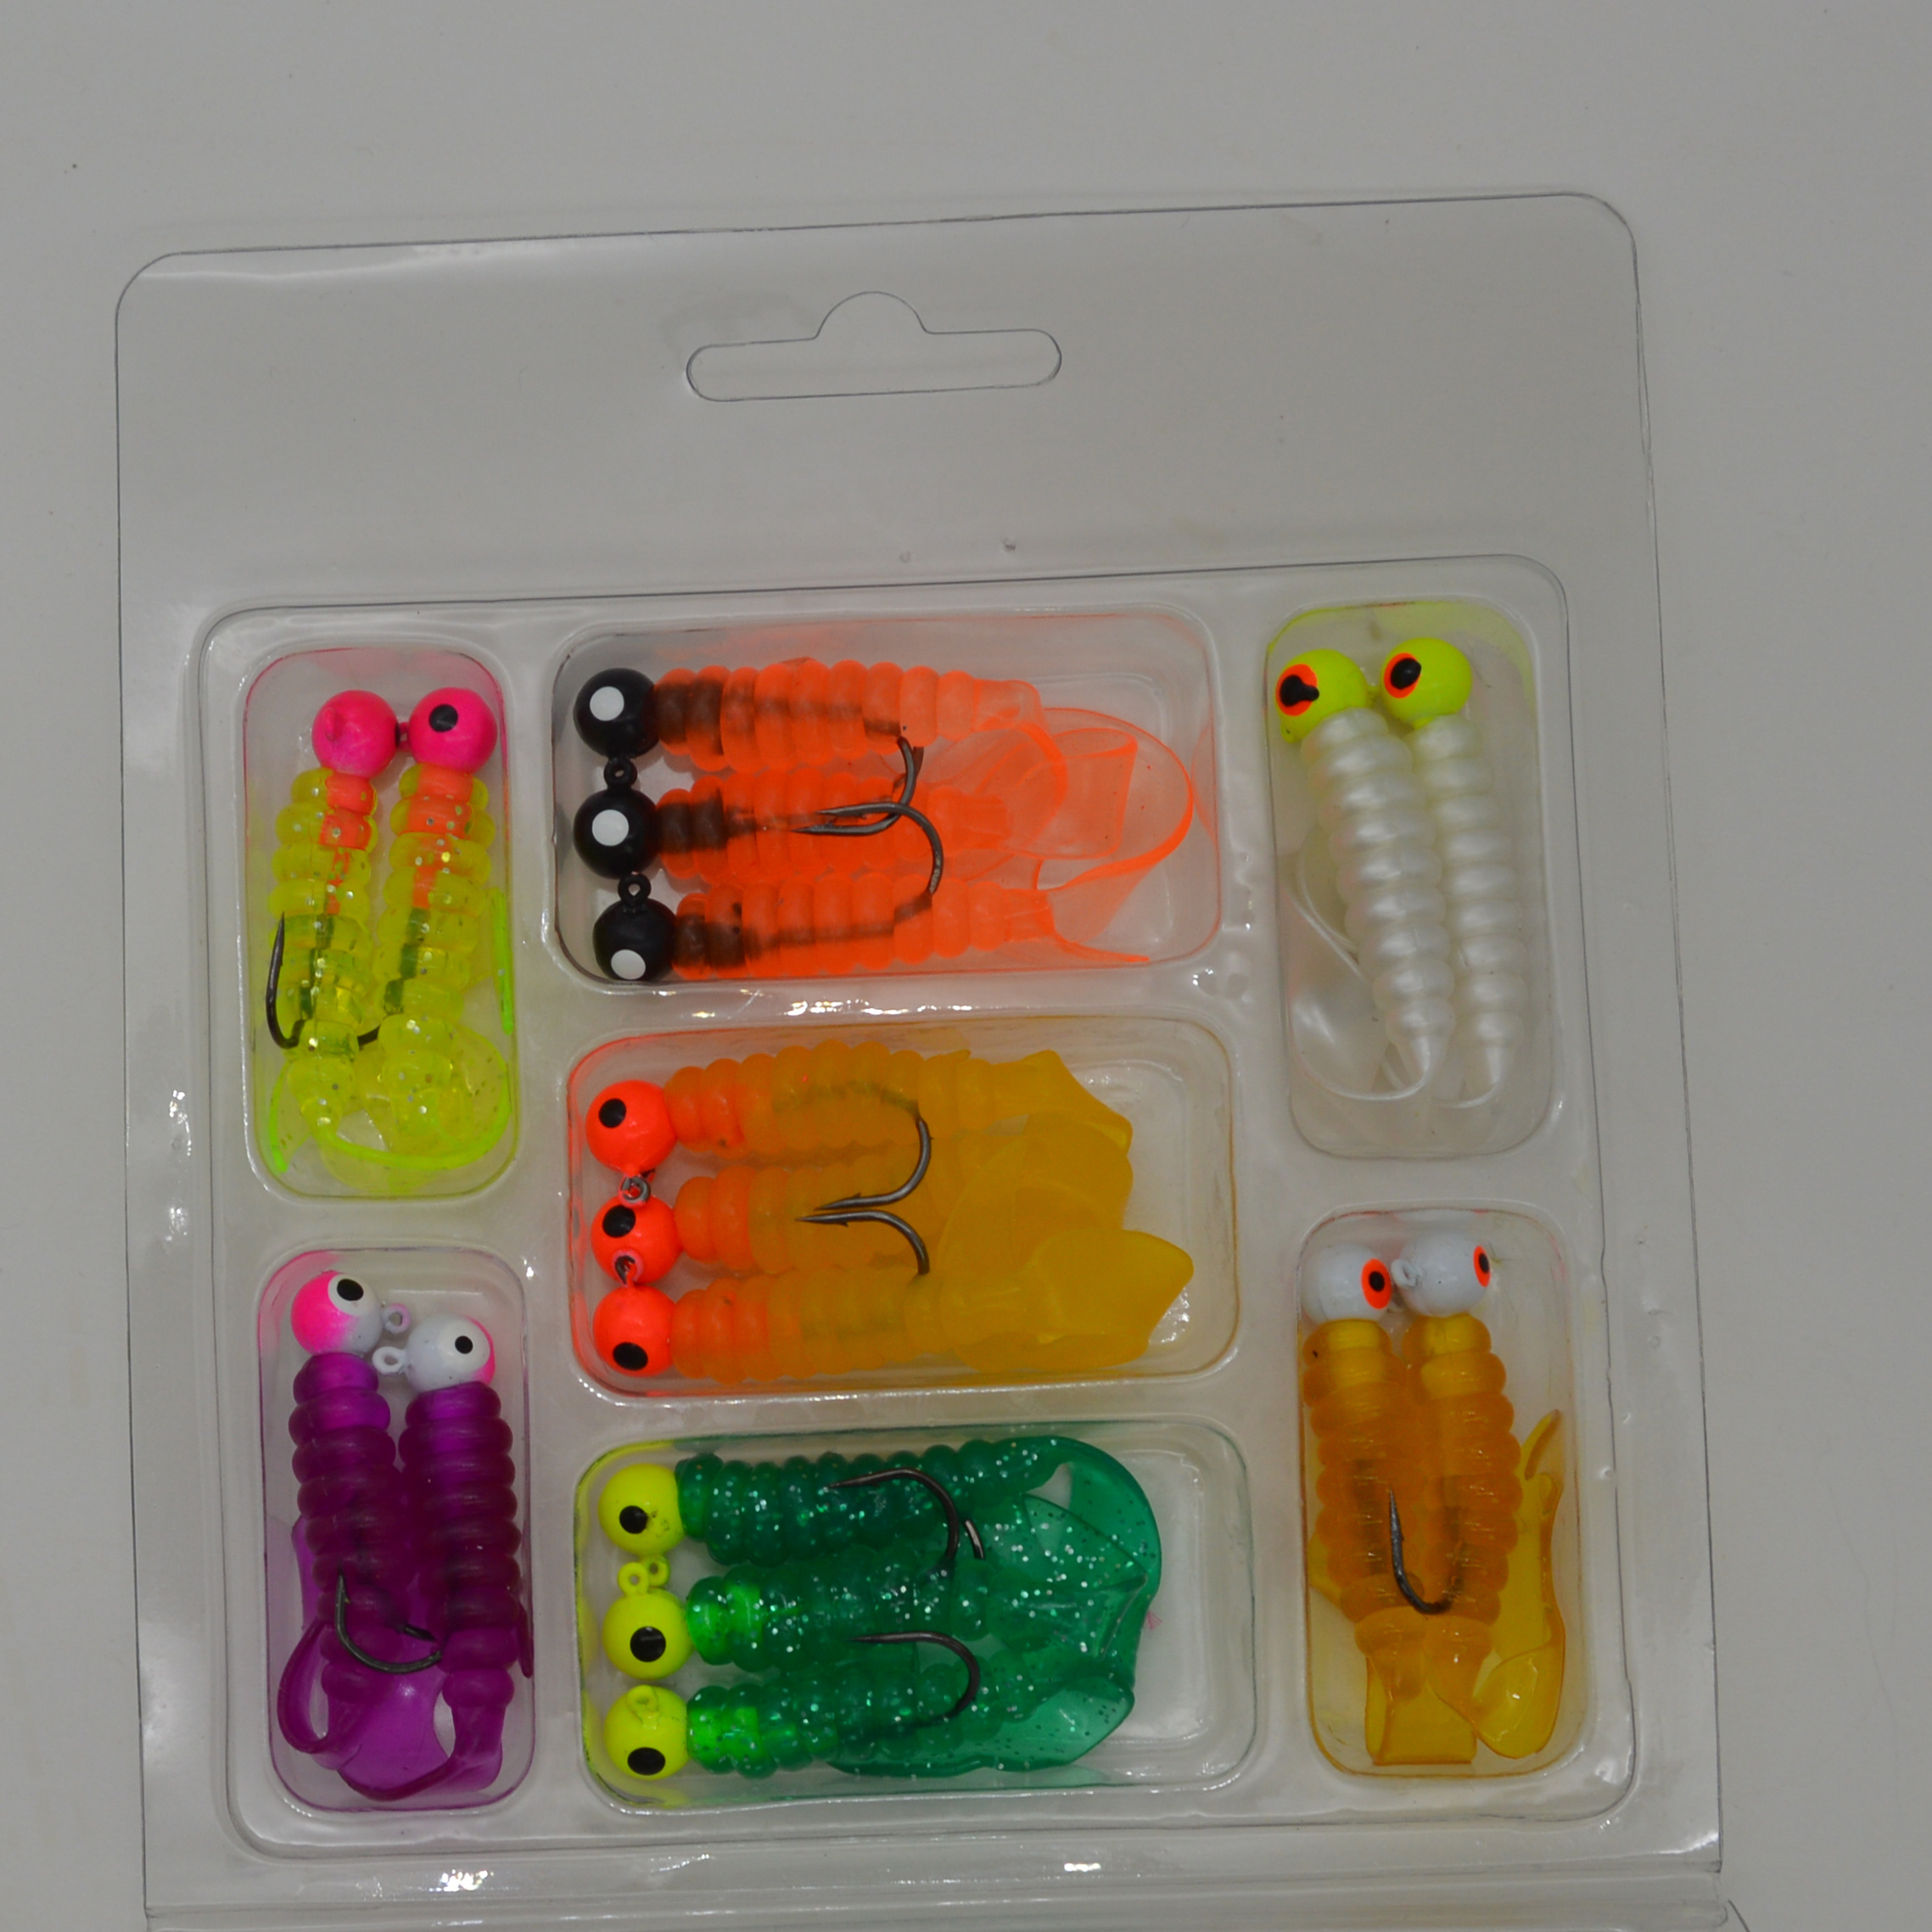 Metal Jig Head Fishing Hooks Soft Worm Lure Grub Silicone Fish Artificial  Bait Tackle 231221 From Bei09, $27.59